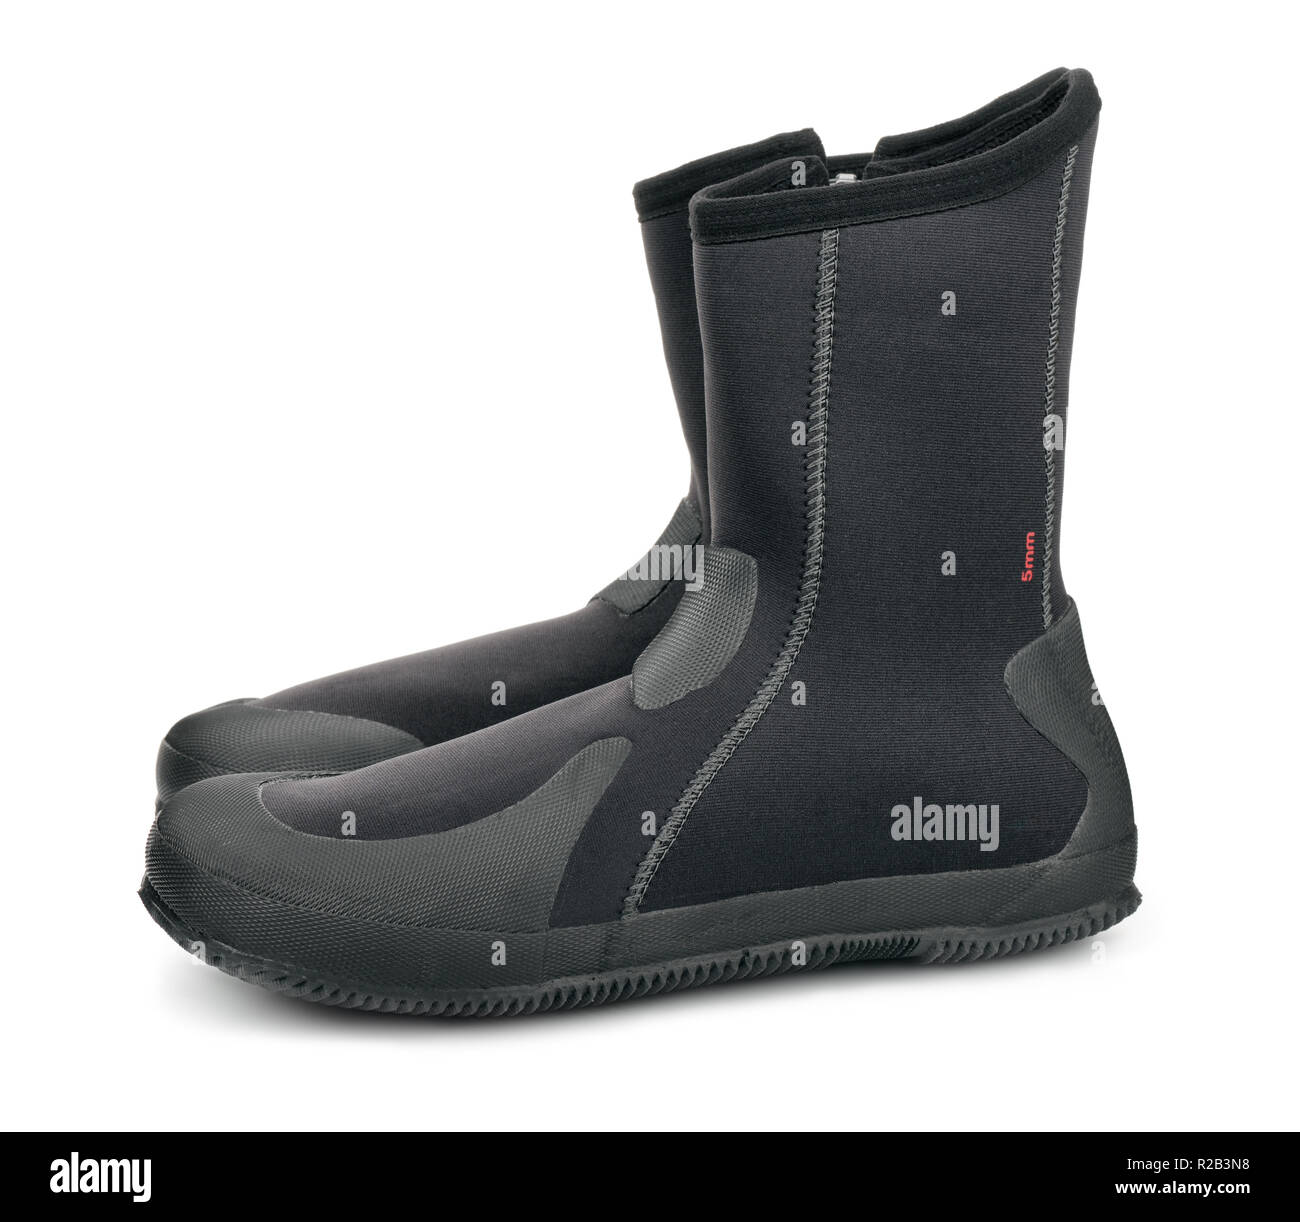 Neoprene scuba diving boots isolated on white Stock Photo - Alamy